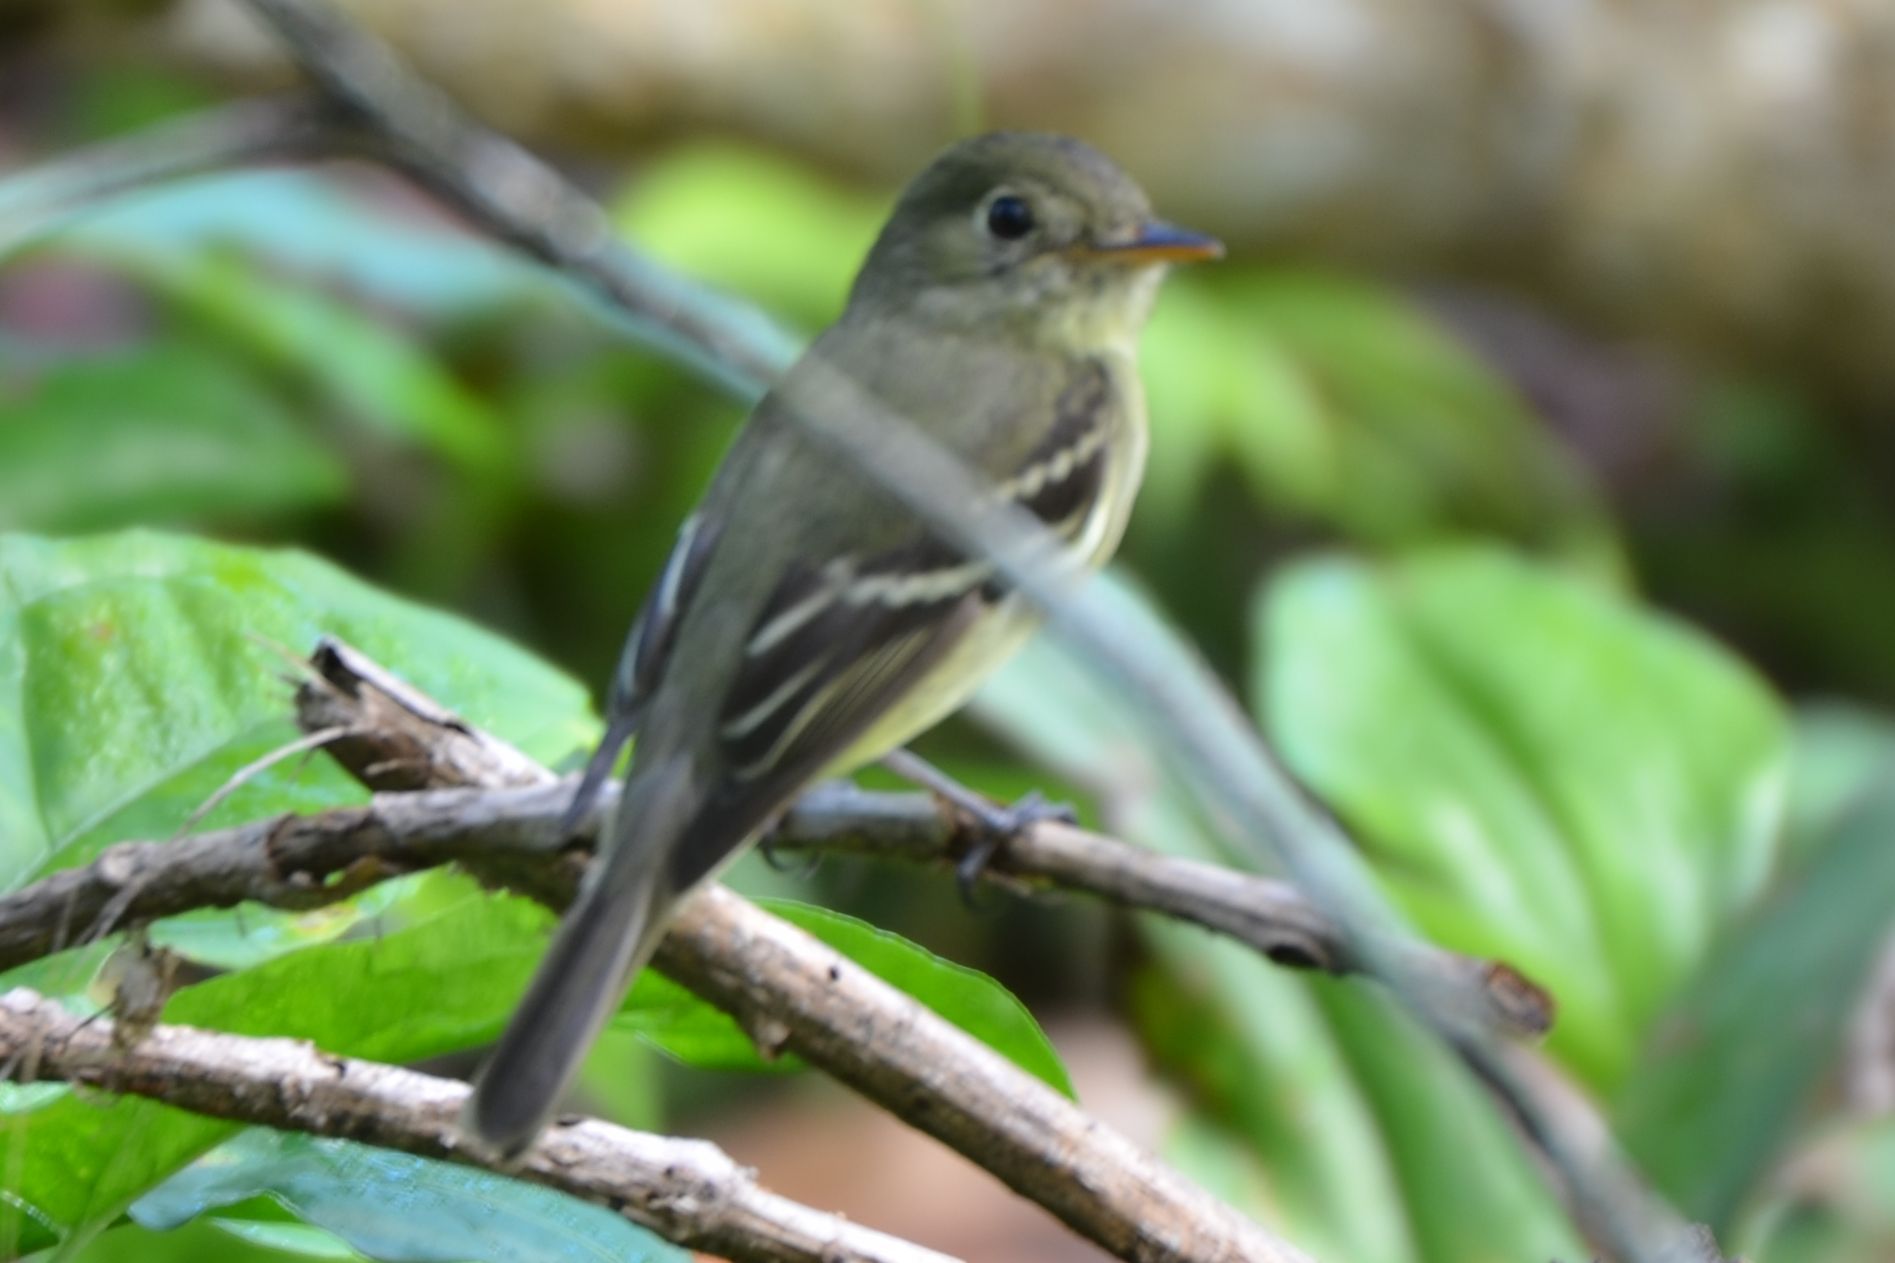 Click picture to see more Yellow-bellied Flycatchers.